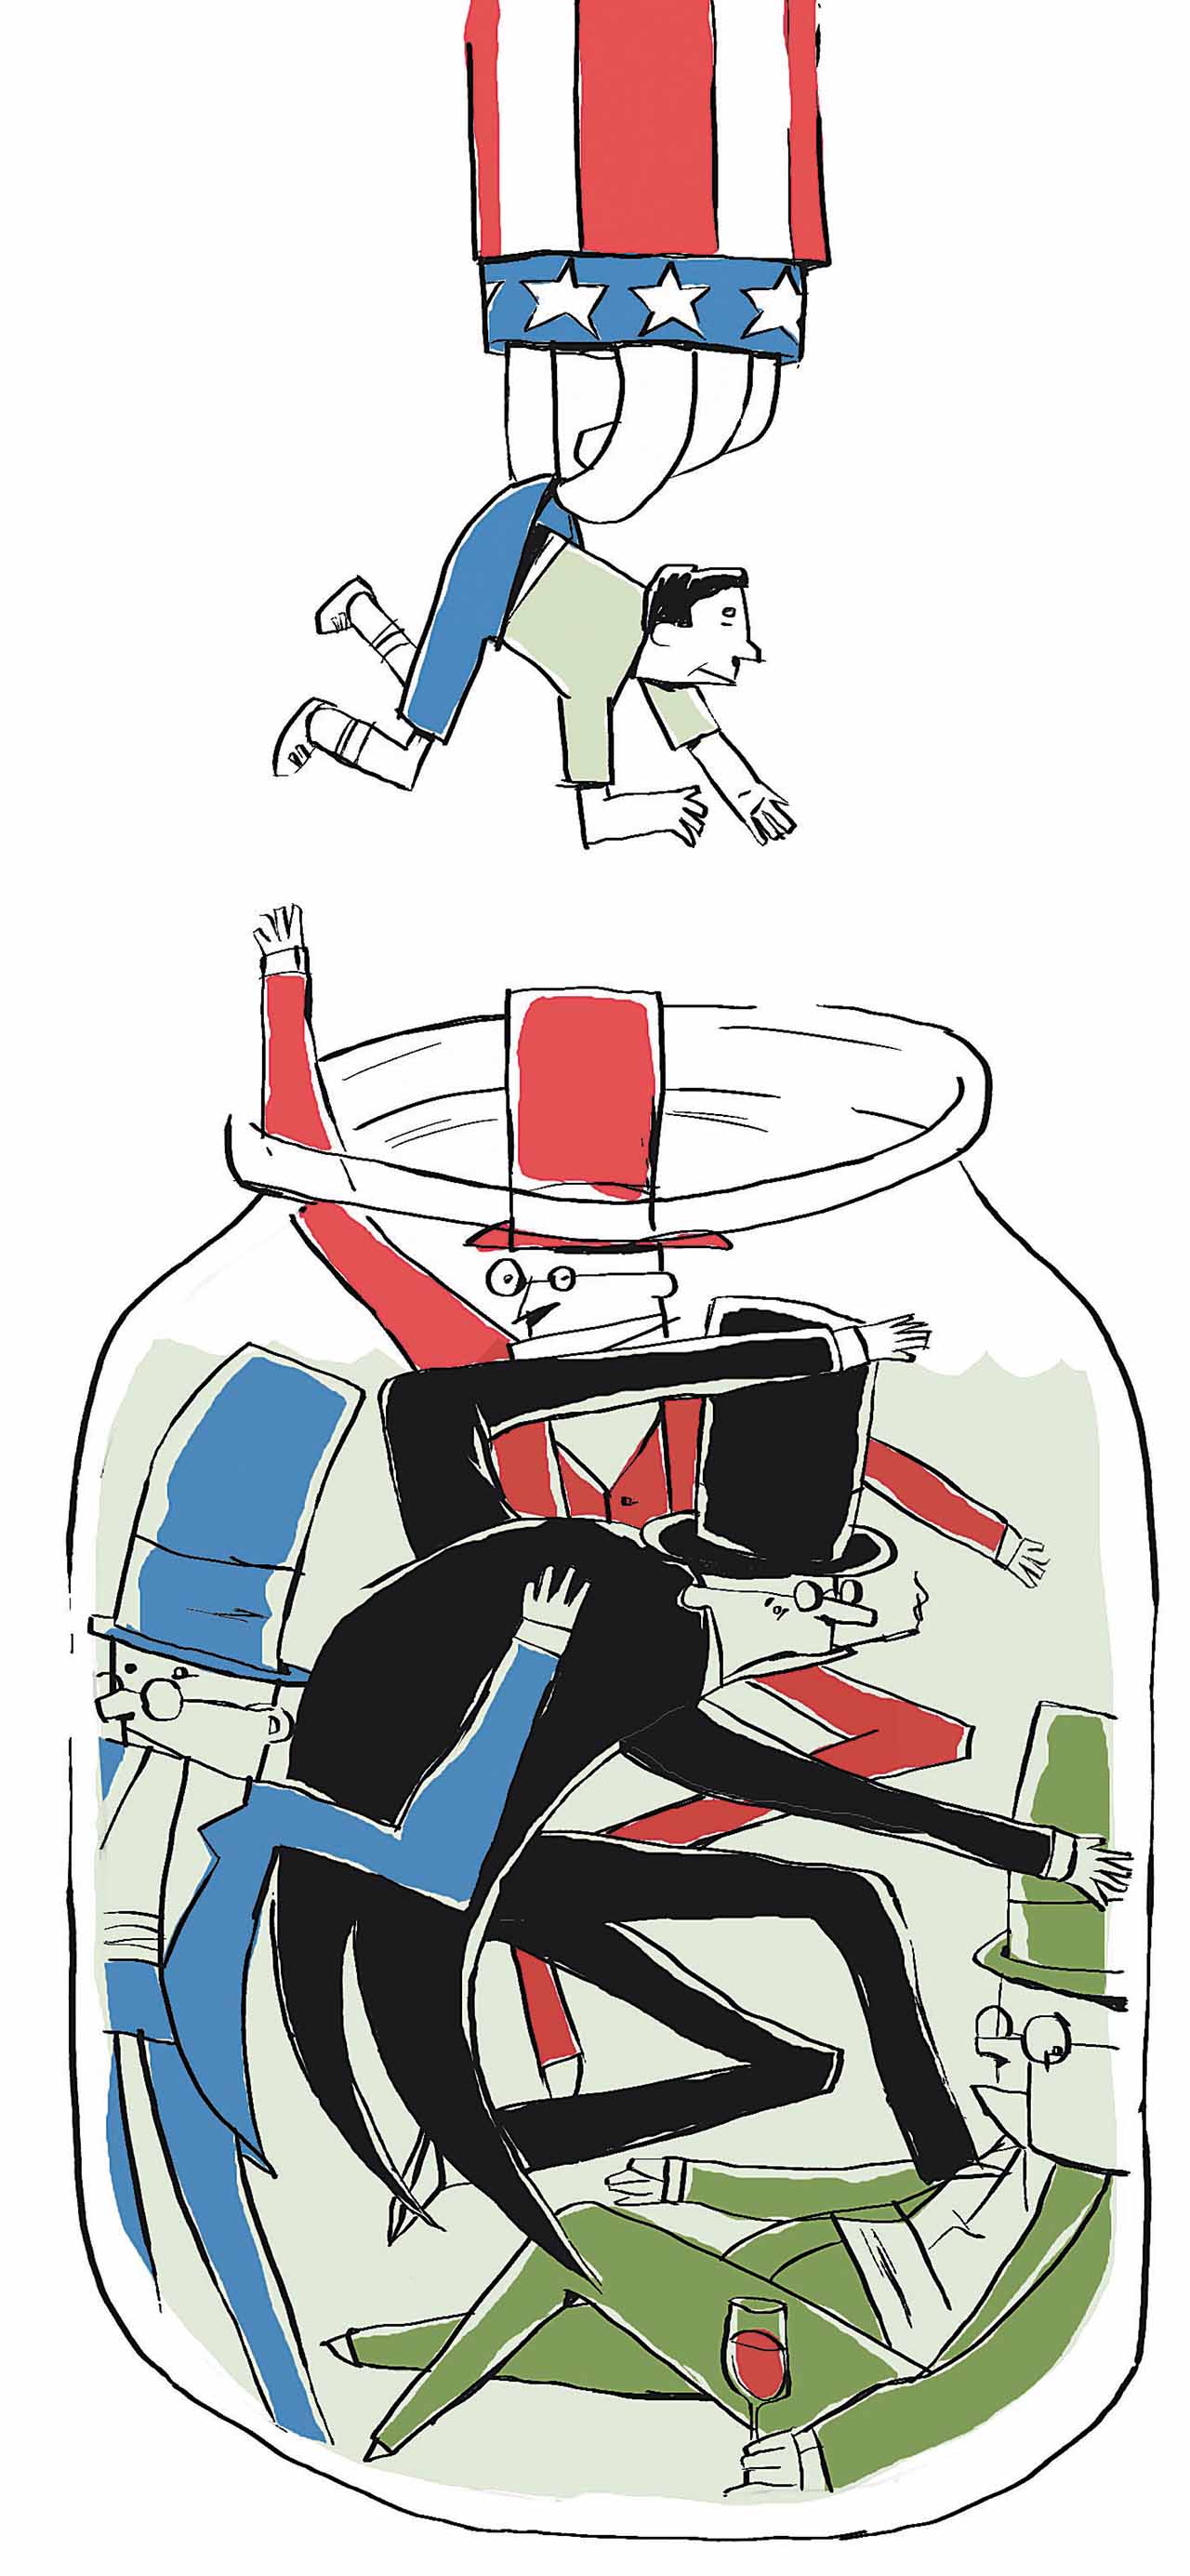 Illustration of people being dropped into a jar.